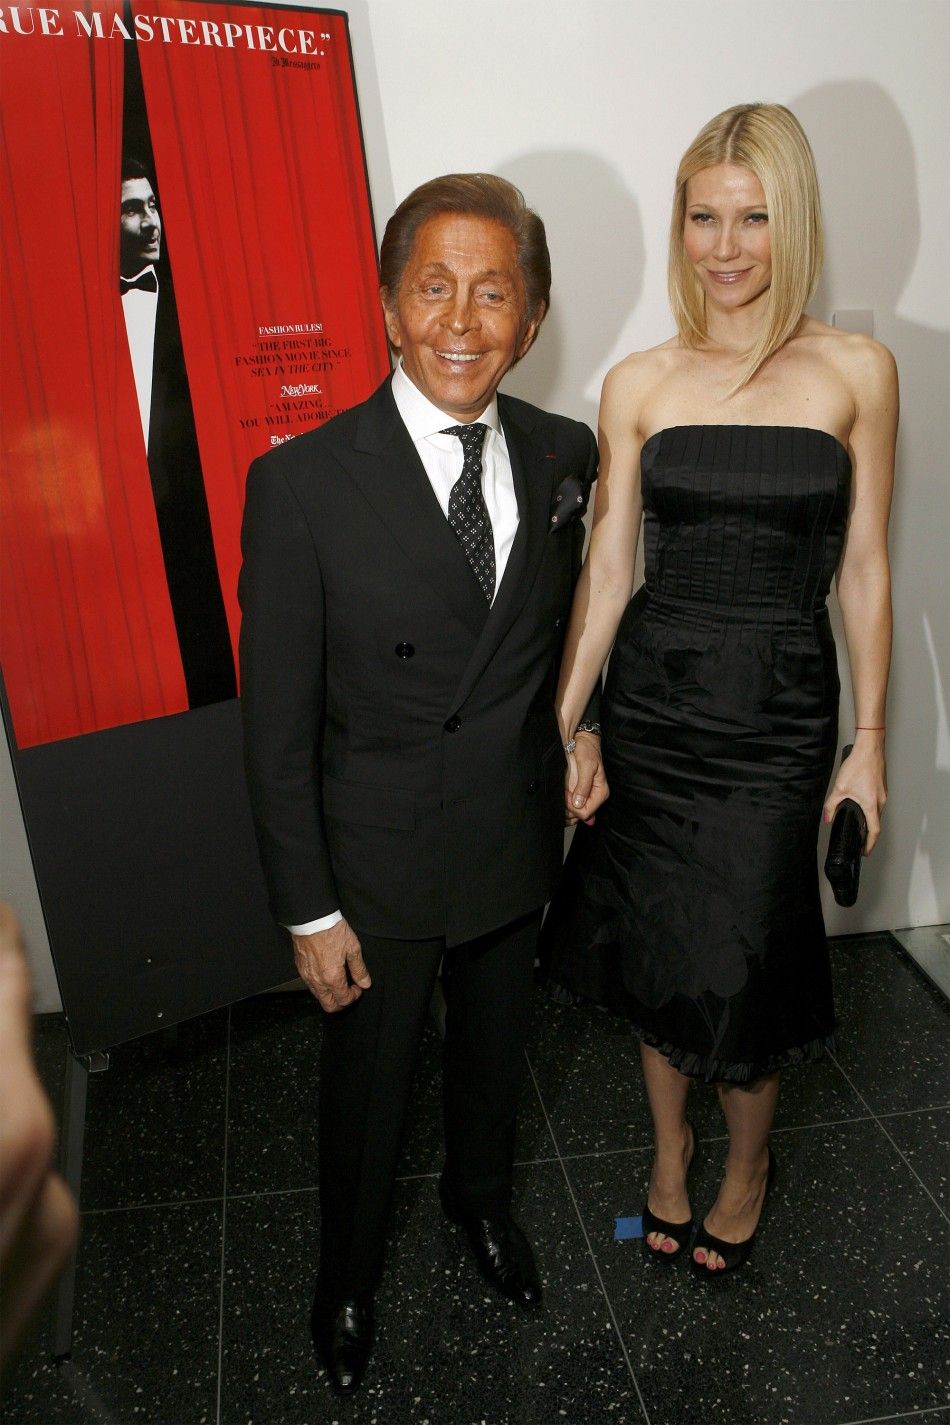 Designer Garavani arrives with actress Paltrow at the premiere of the film quotValentino The Last Emperorquot in New York